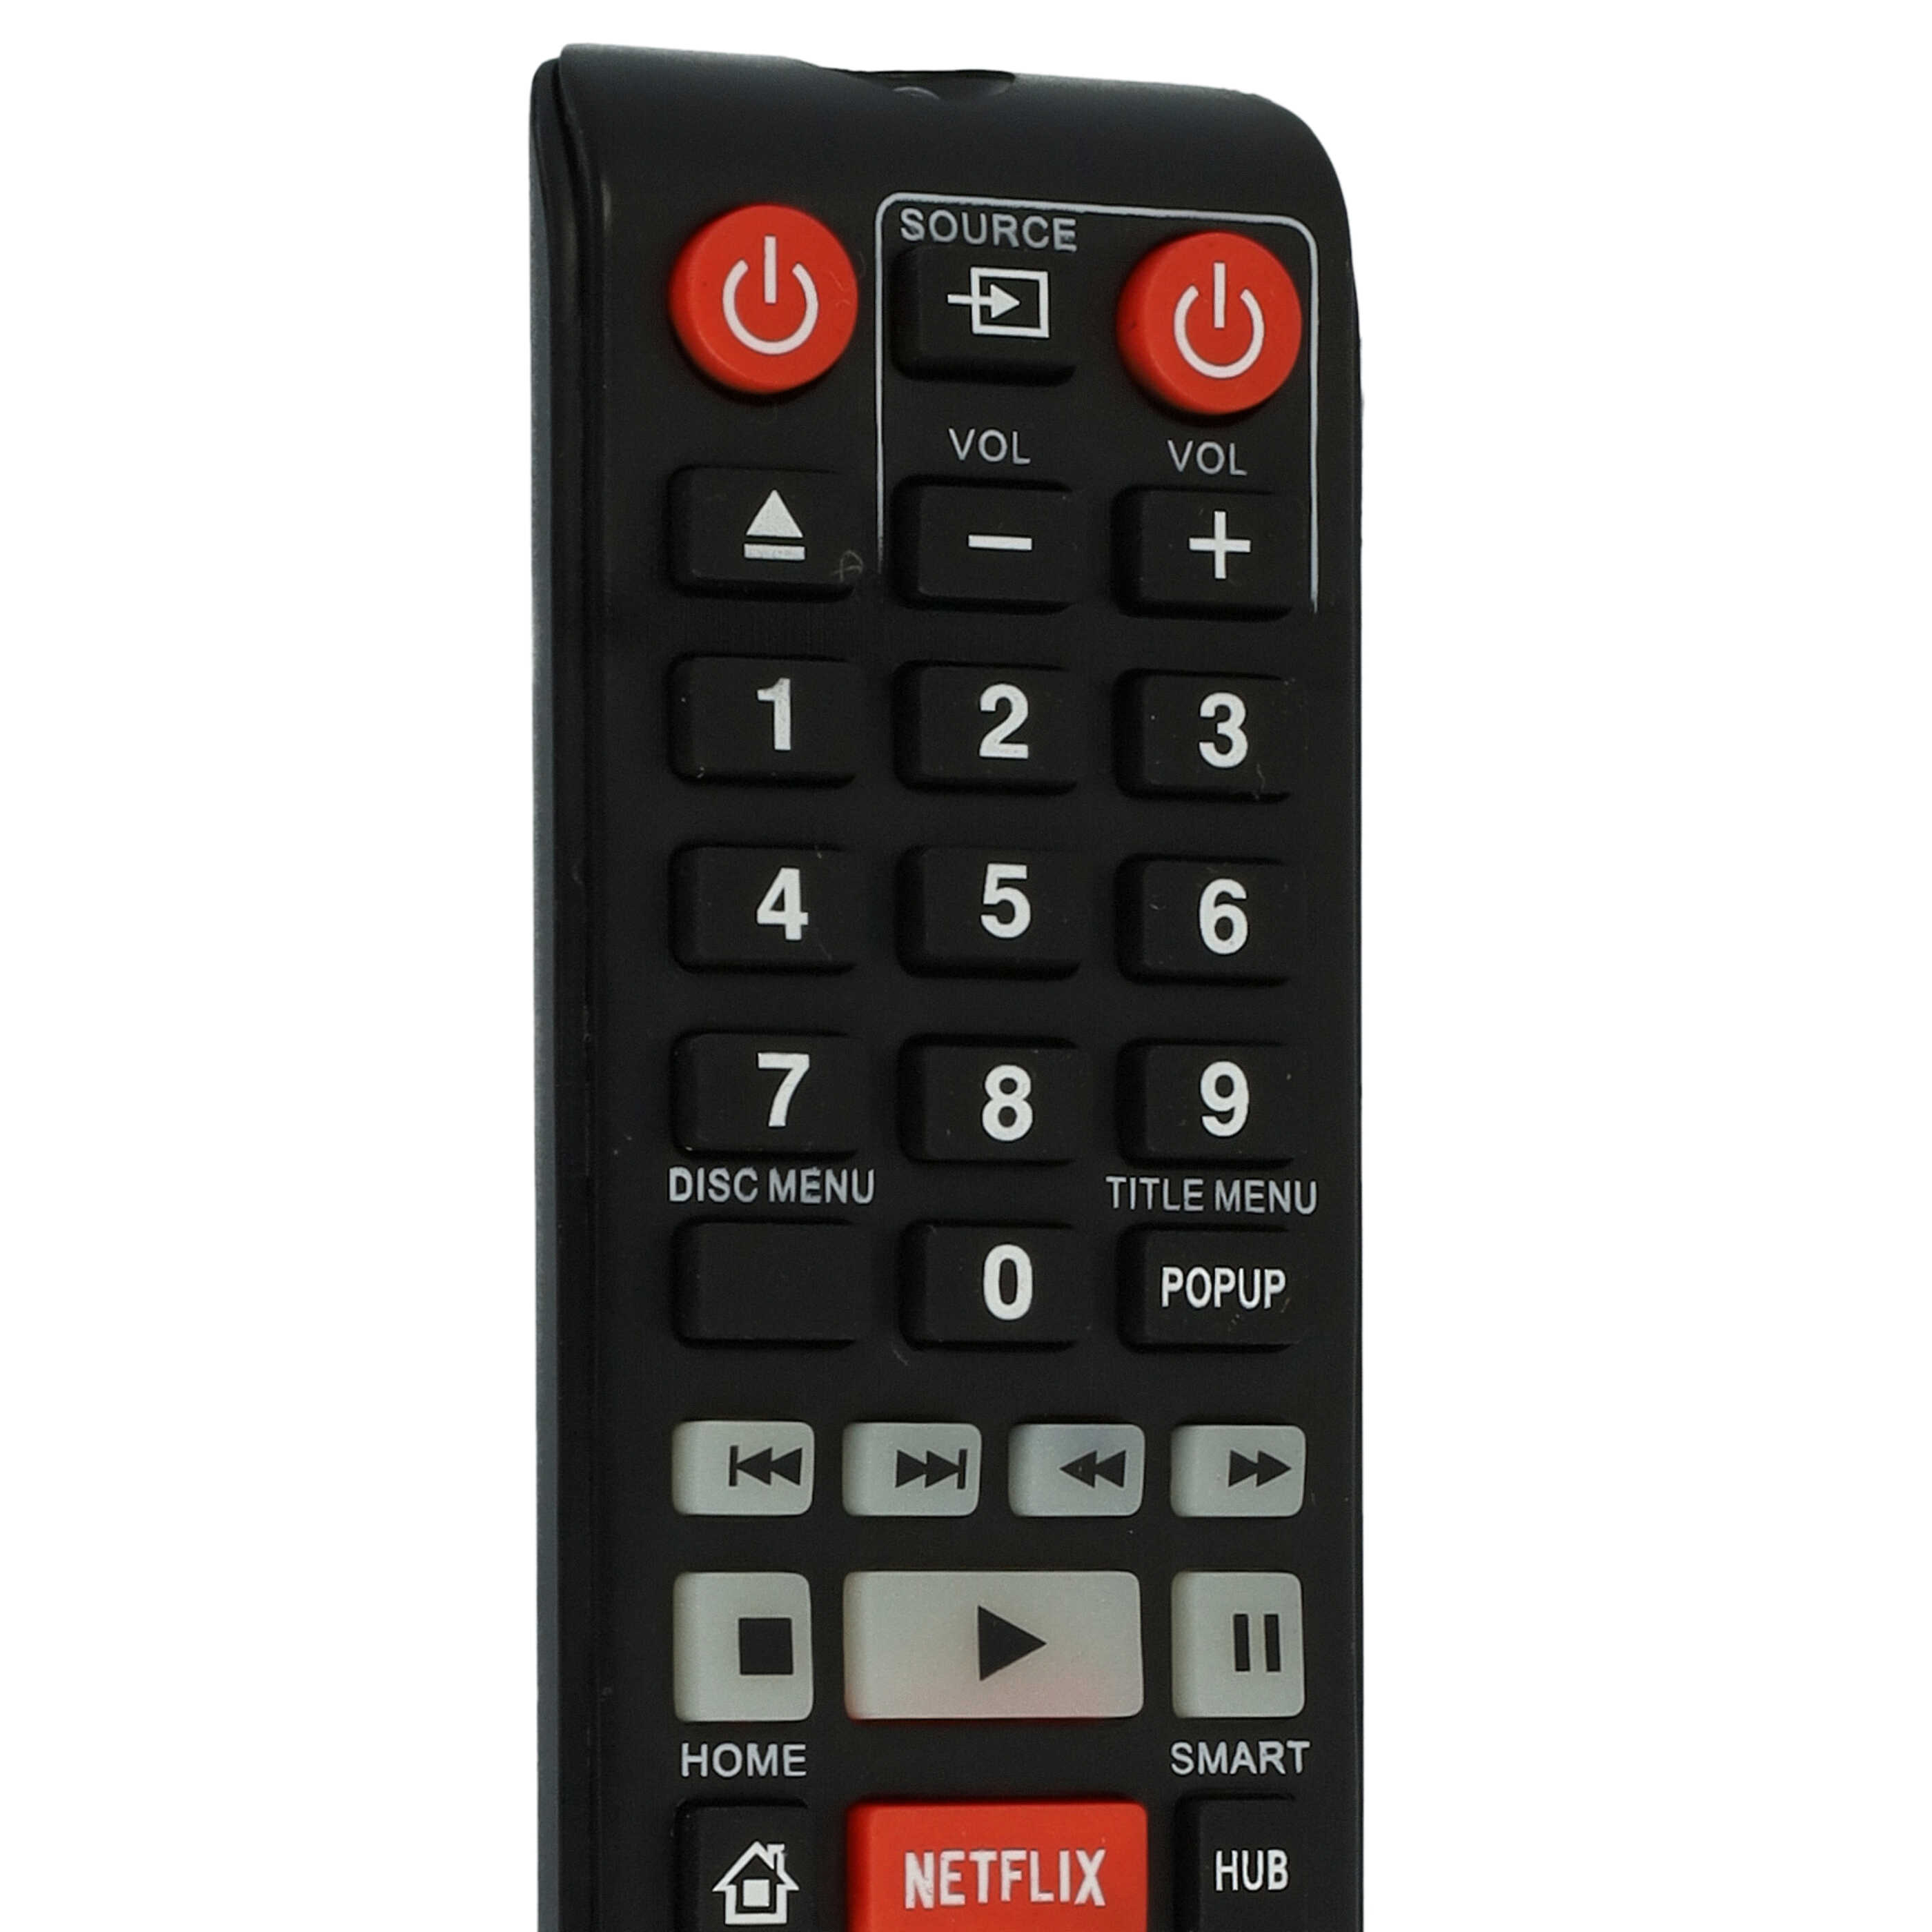 Remote Control replaces Samsung AH59-02423A, AH59-02411A, AH59-02420A for Samsung Blu-Ray Disc Player